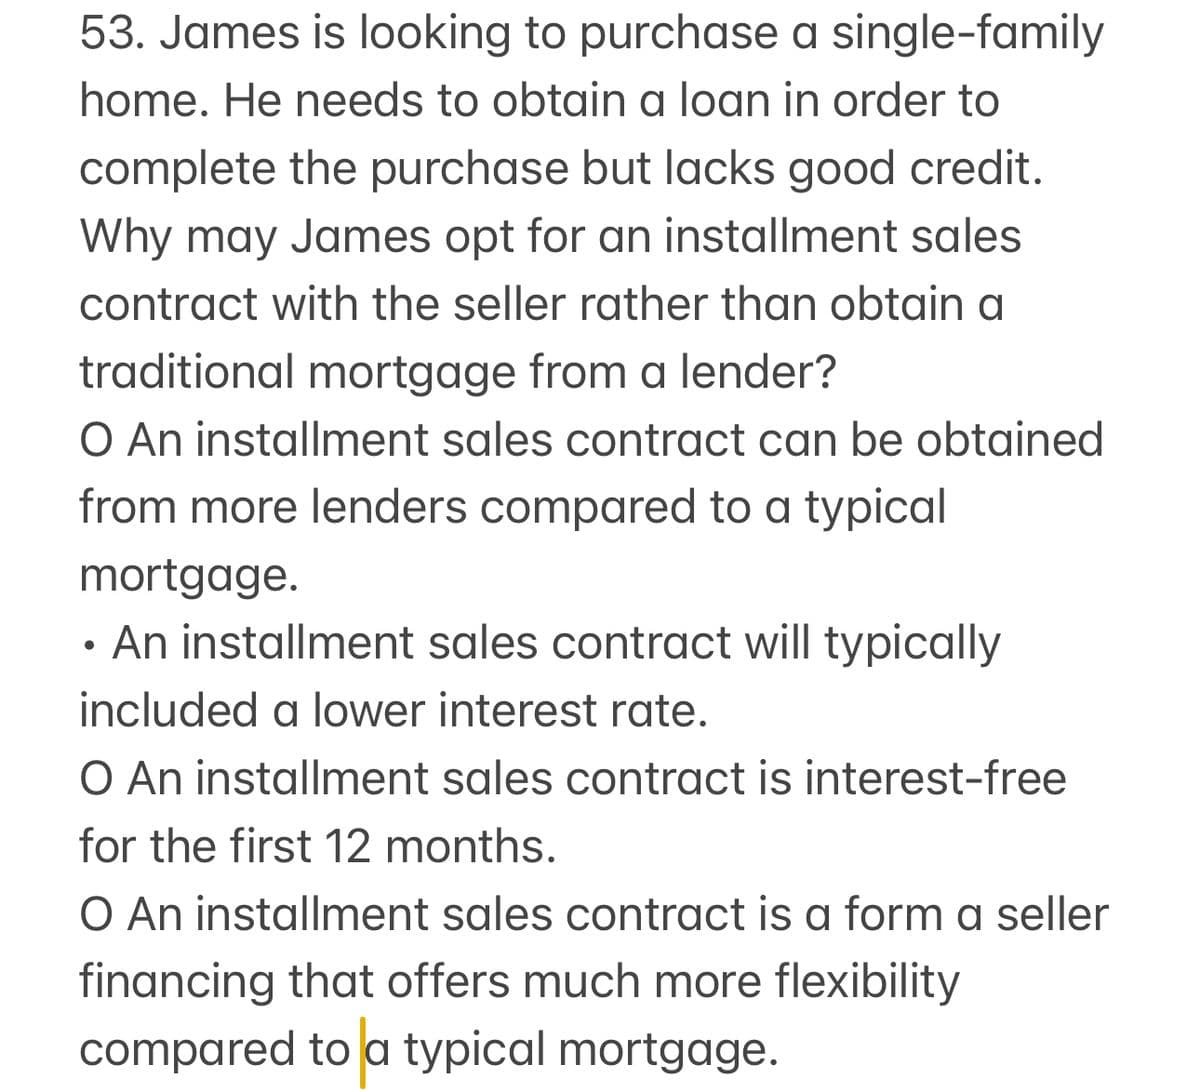 53. James is looking to purchase a single-family
home. He needs to obtain a loan in order to
complete the purchase but lacks good credit.
Why may James opt for an installment sales
contract with the seller rather than obtain a
traditional mortgage from a lender?
O An installment sales contract can be obtained
from more lenders compared to a typical
mortgage.
•
An installment sales contract will typically
included a lower interest rate.
O An installment sales contract is interest-free
for the first 12 months.
O An installment sales contract is a form a seller
financing that offers much more flexibility
compared to a typical mortgage.